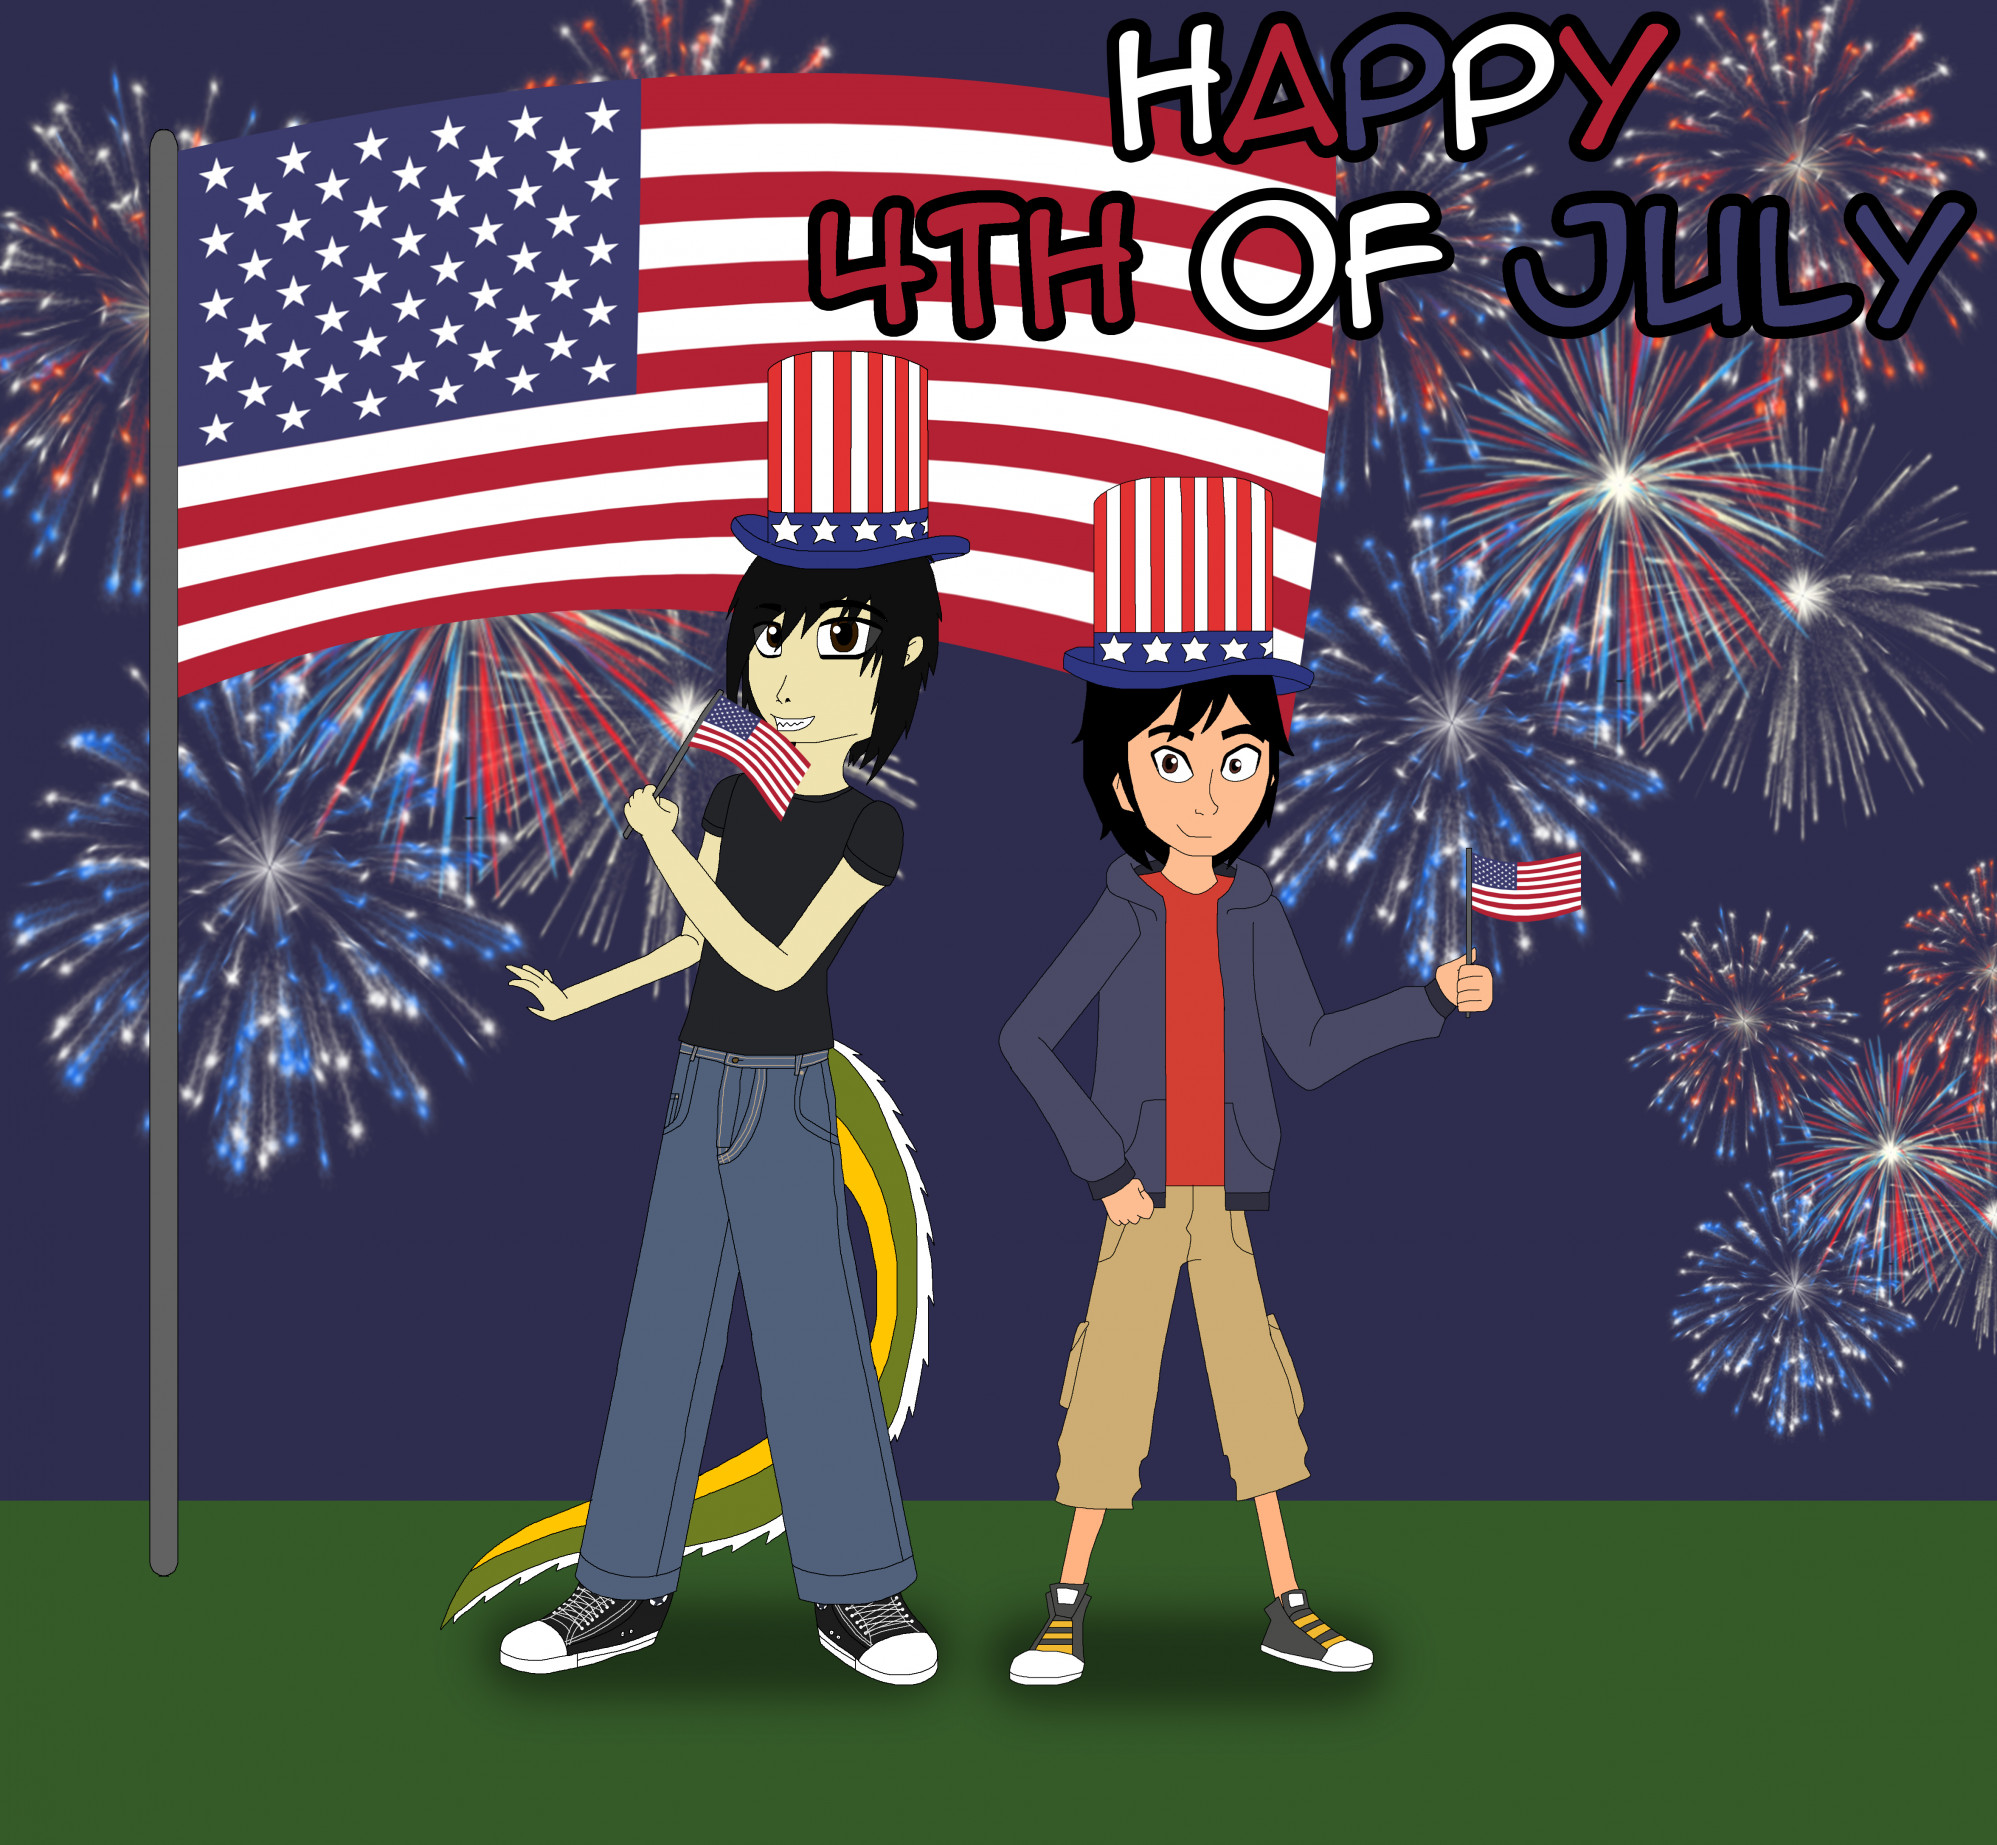 🇺🇸Happy 4th of July!!!! 🇺🇸... - Cute Anime Couples & Quotes | Facebook